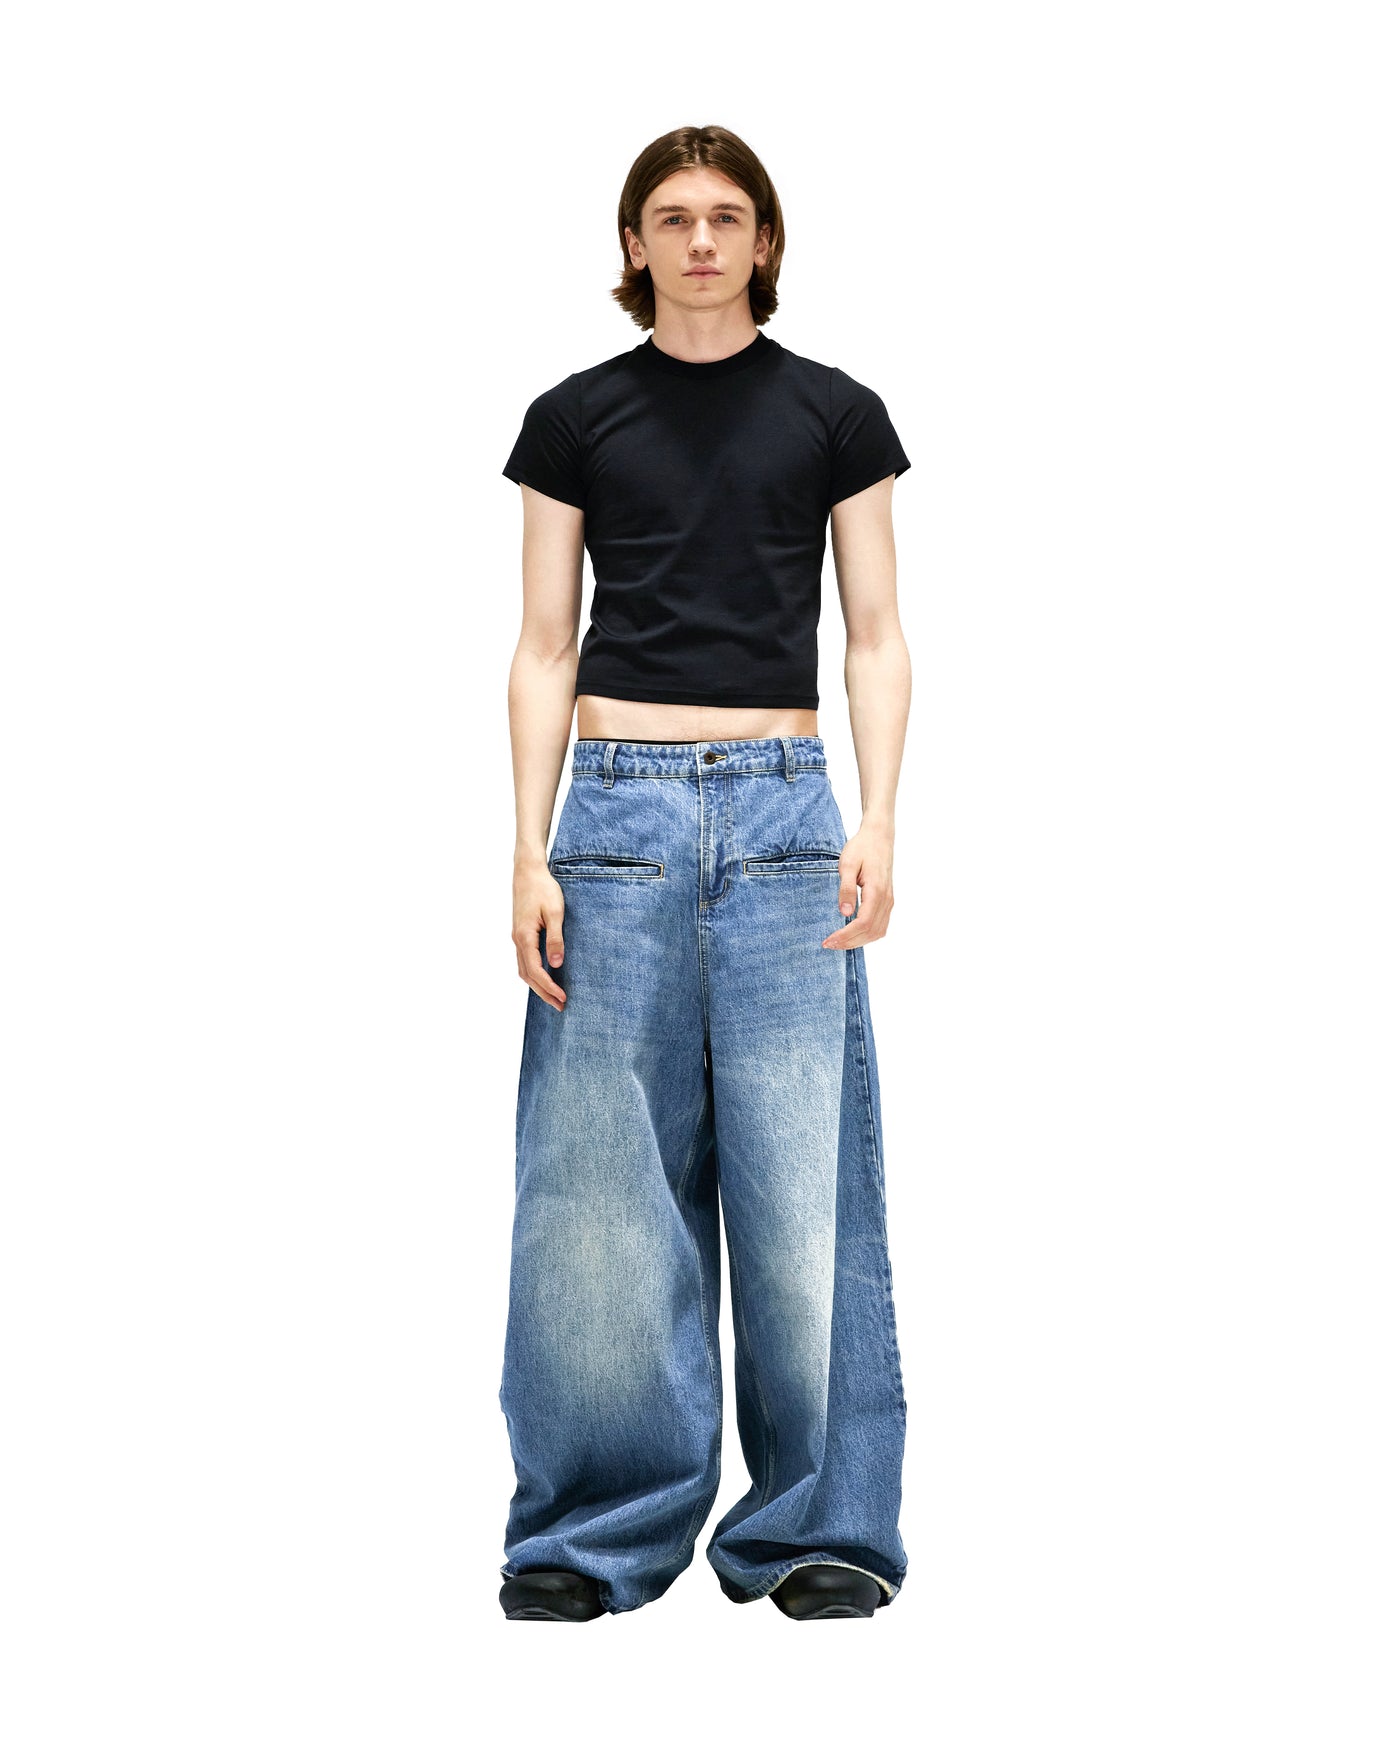 FaxCopyExpress Jeans 01 FCE XL梱包も丁寧にさせていただきます - www ...